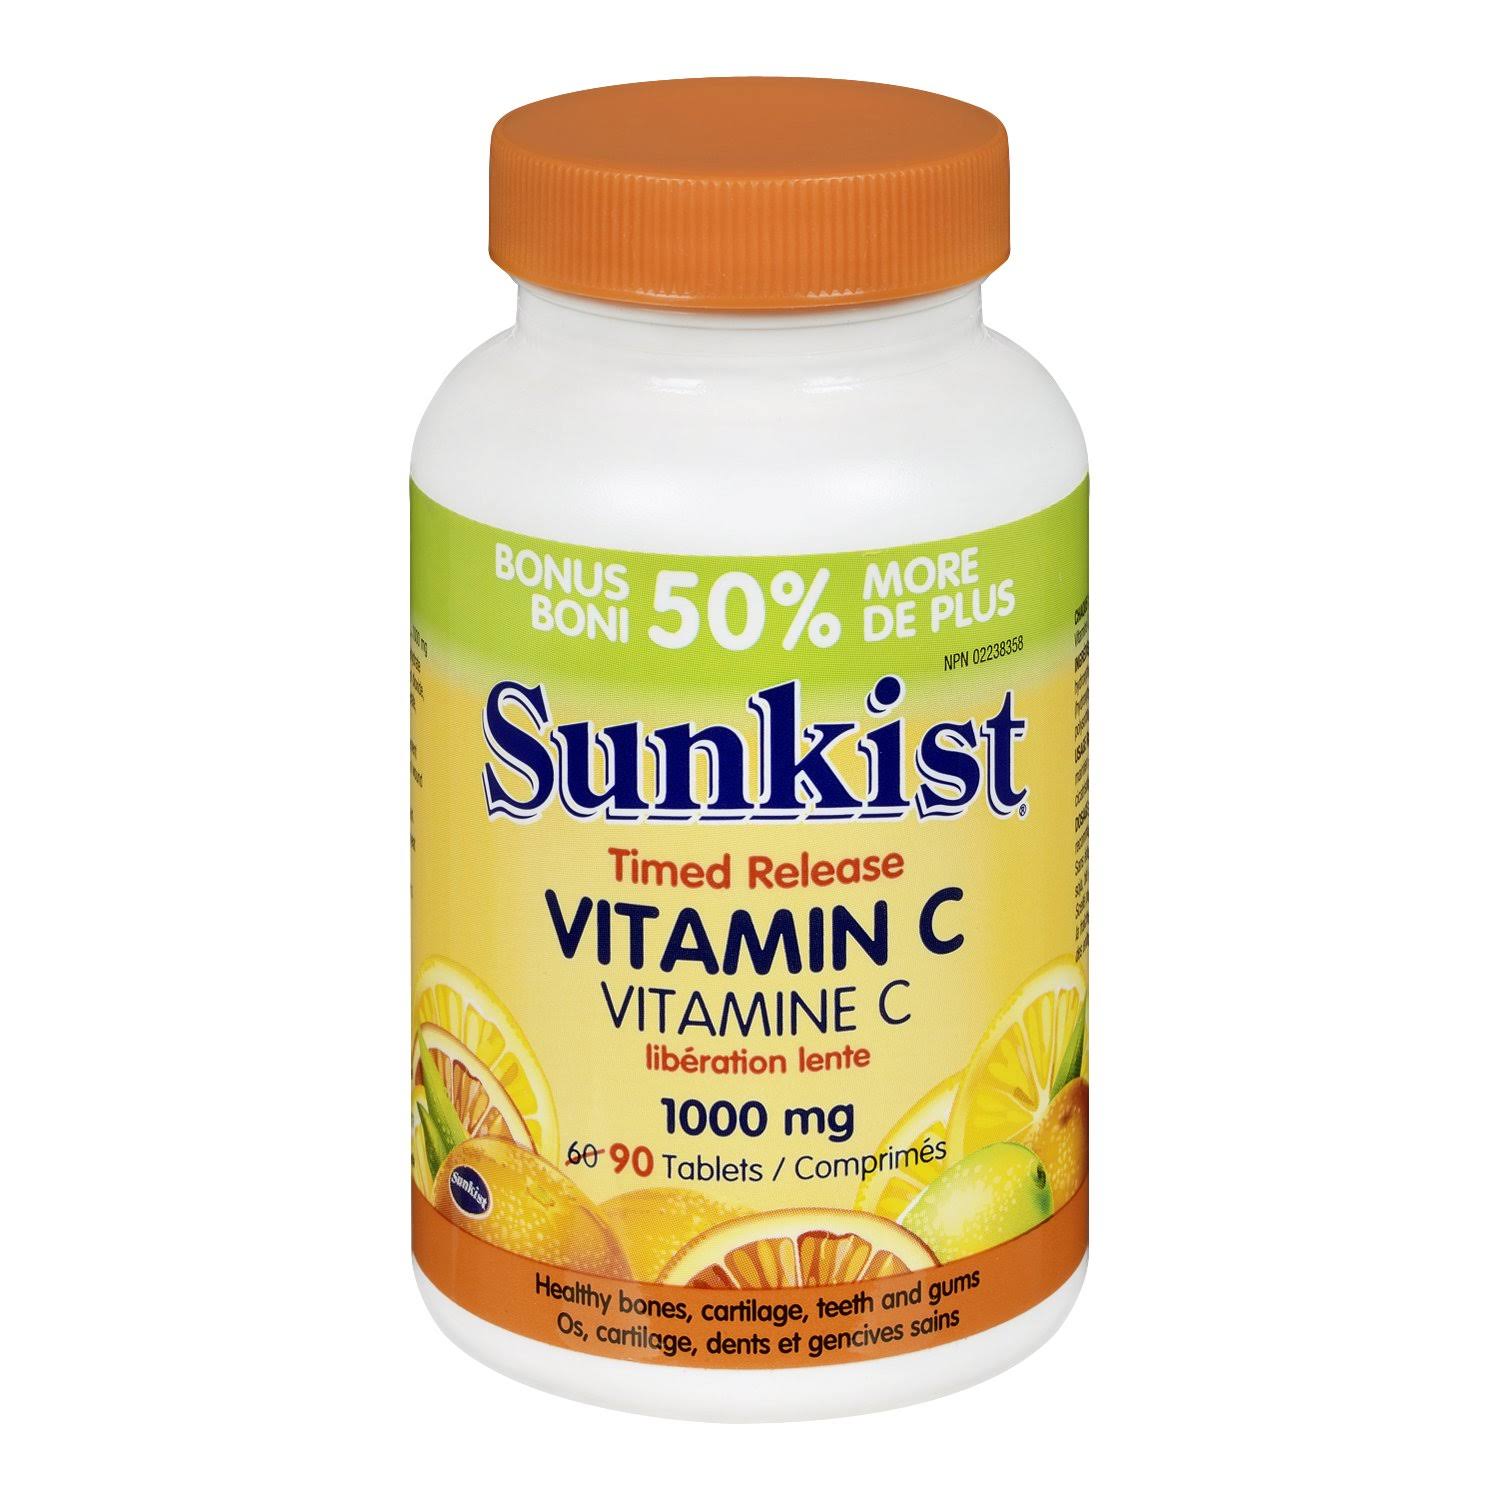 Sunkist Vitamin C Time Release Supplement - 1000mg